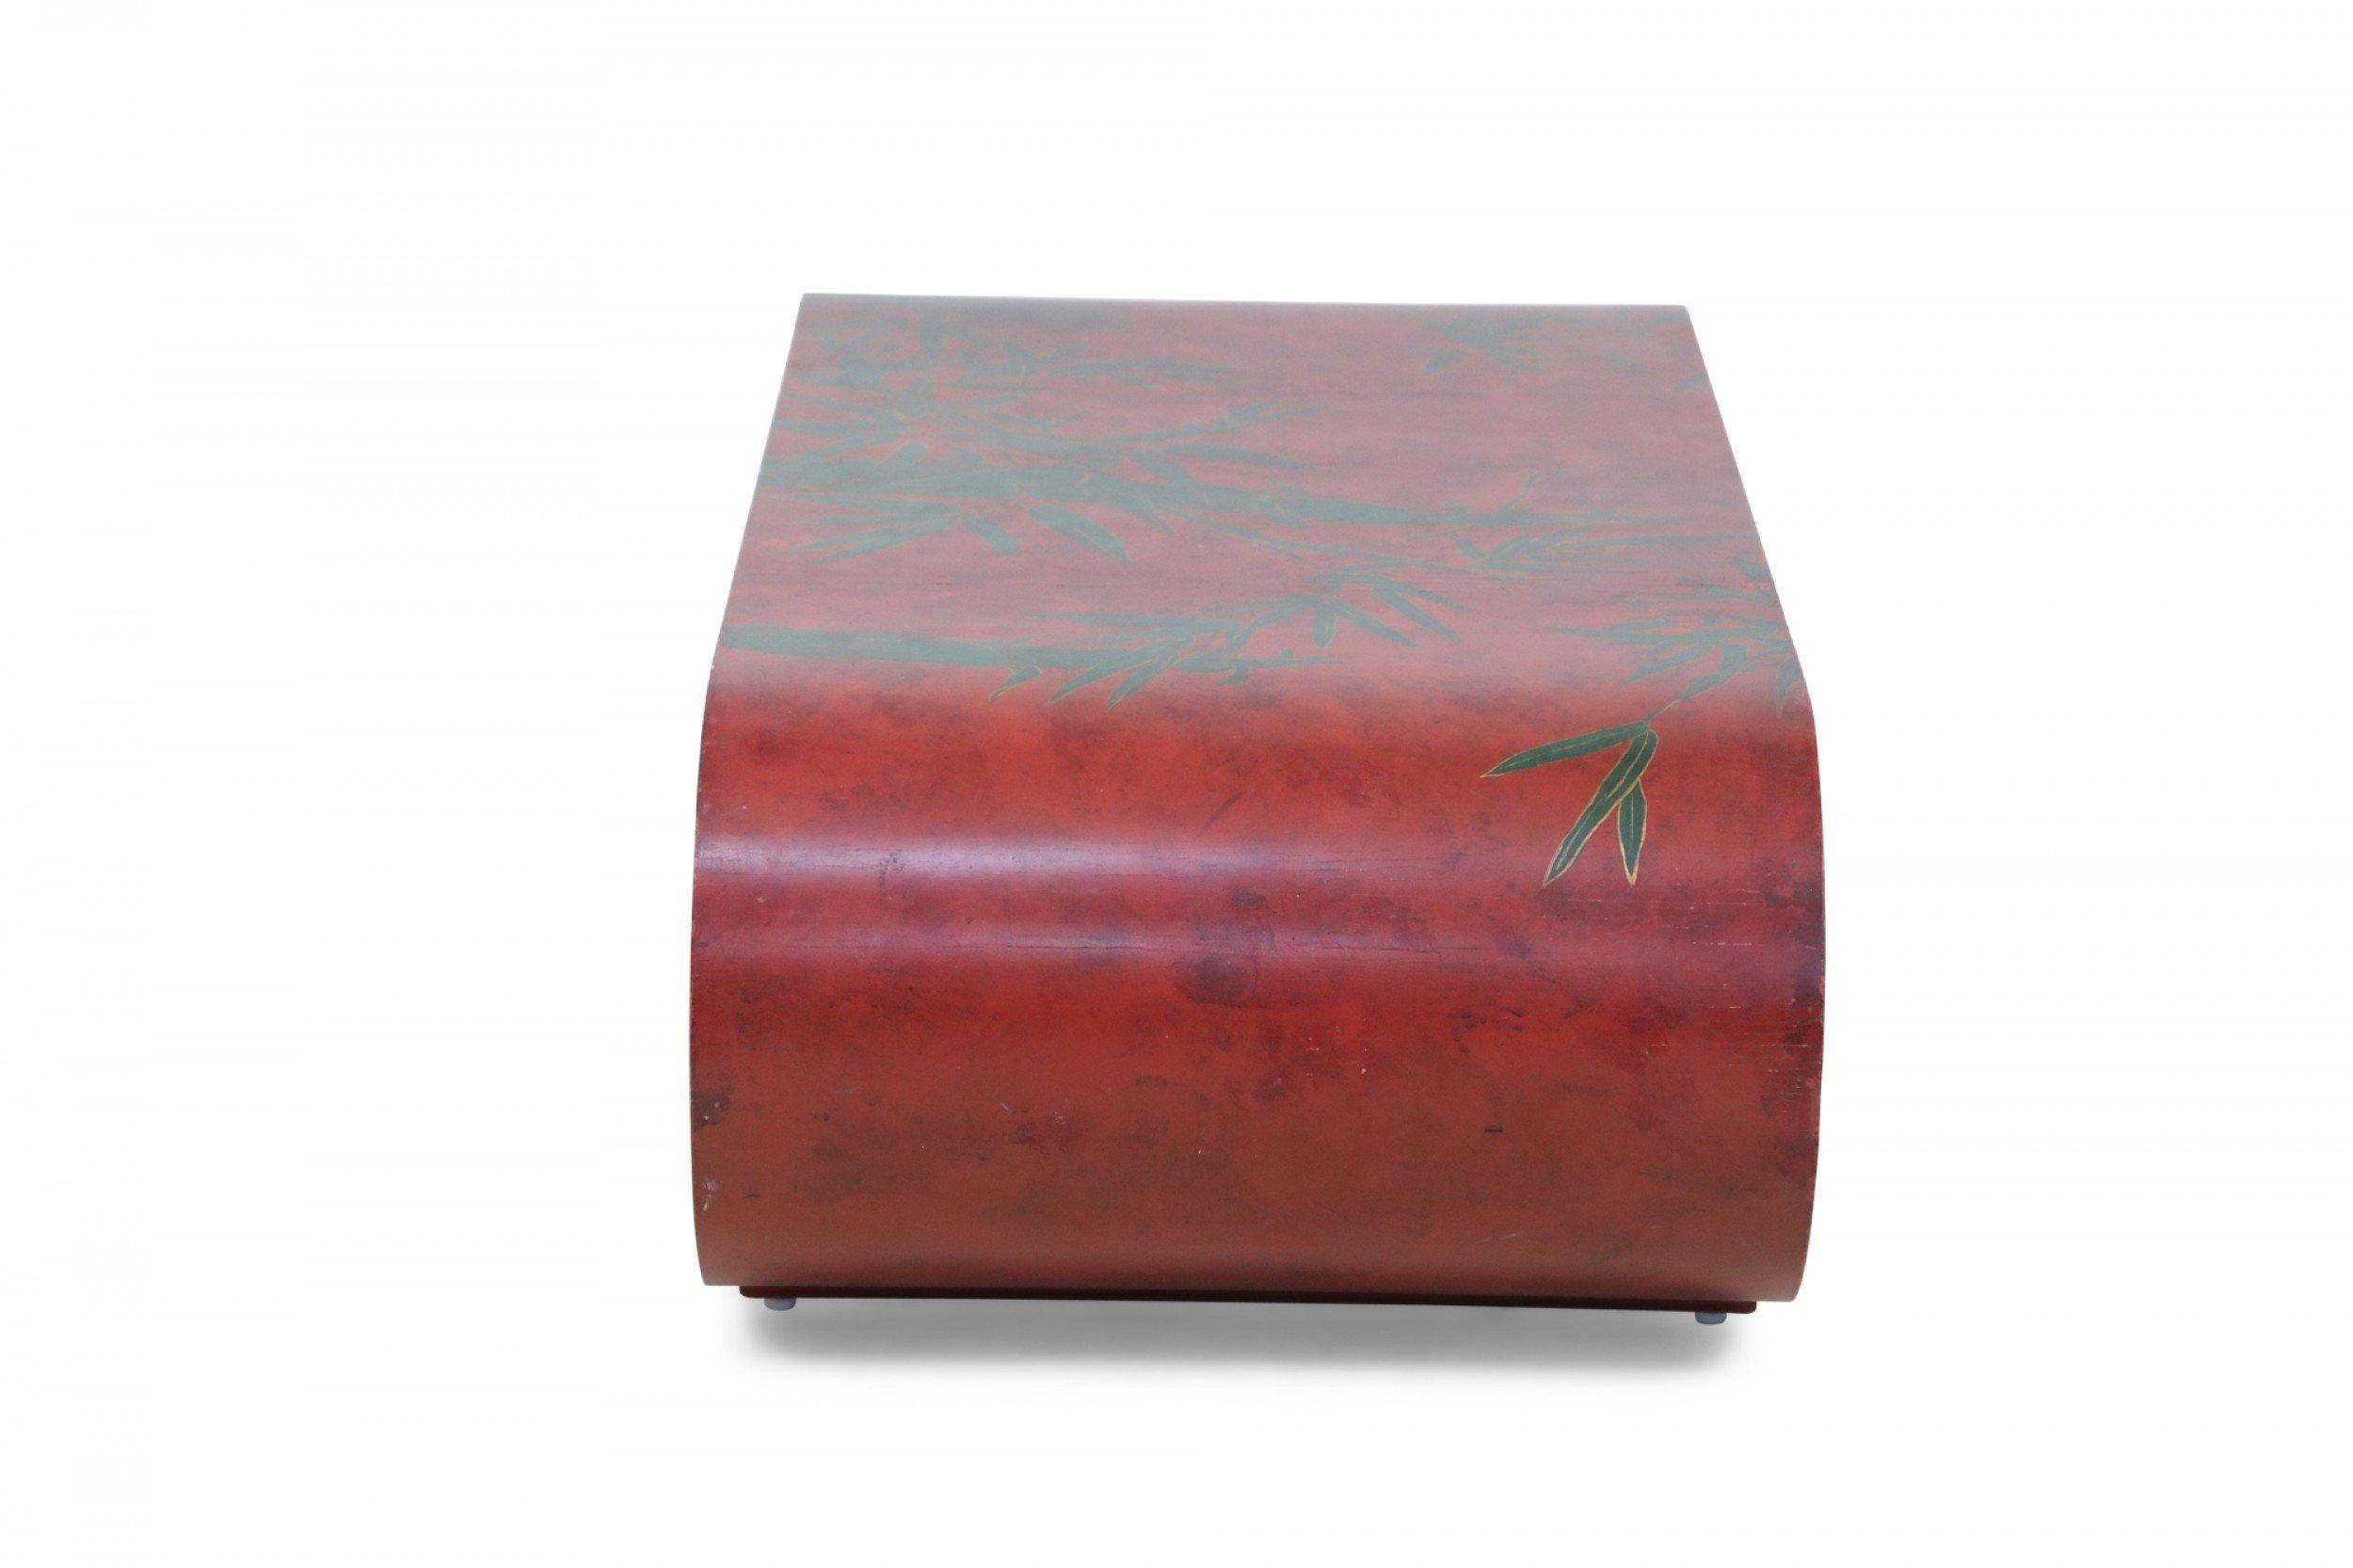 Chinese red lacquered, low scroll side coffee table painted with a muted green bamboo leaf motif, outlined in gold across the surface.